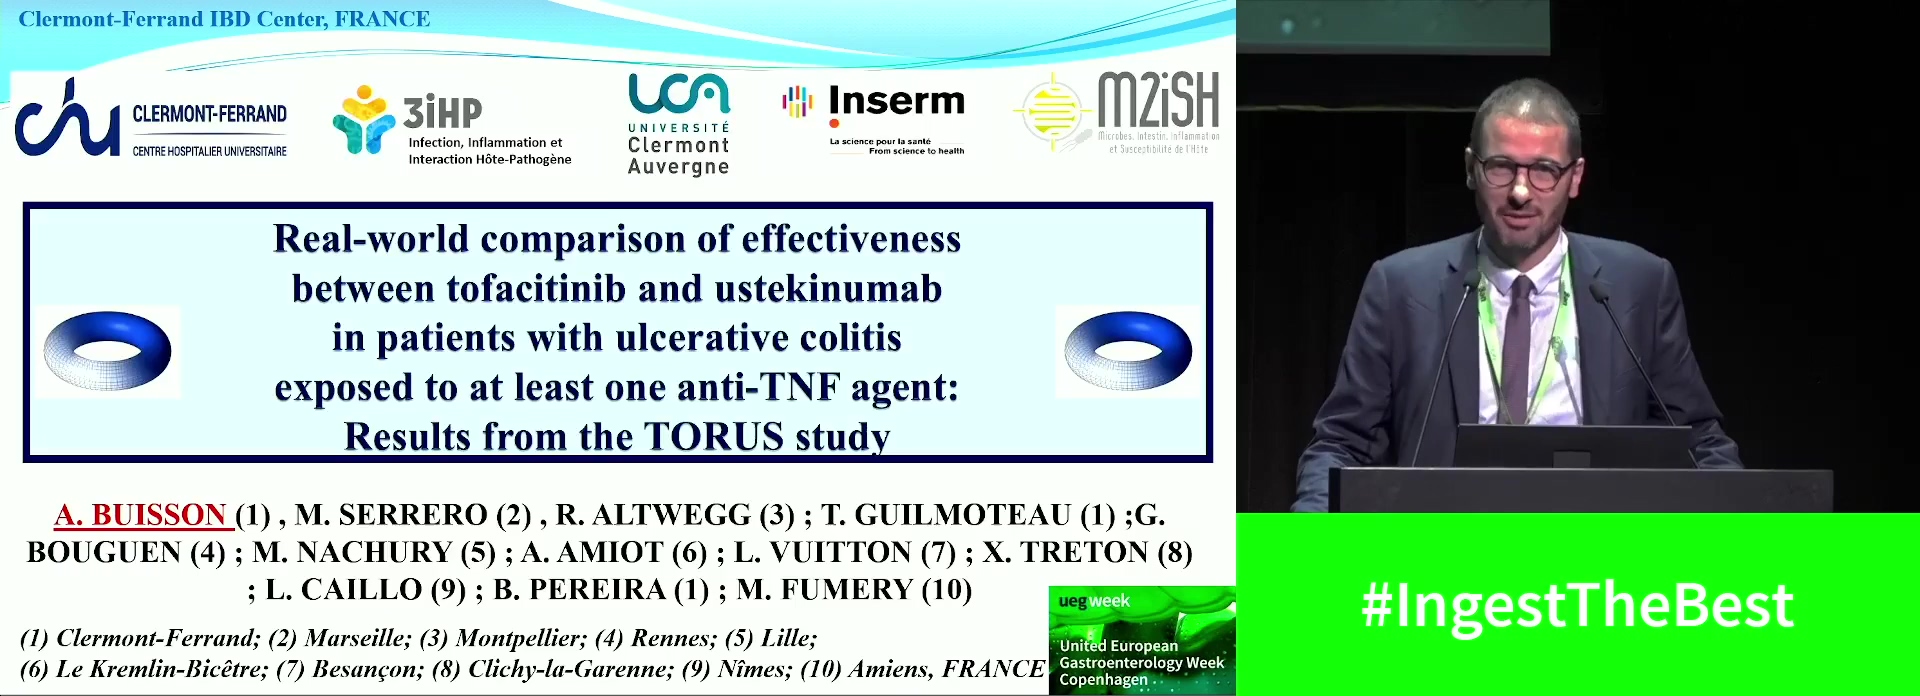 REAL-WORLD COMPARISON OF EFFECTIVENESS BETWEEN TOFACITINIB AND USTEKINUMAB IN PATIENTS WITH ULCERATIVE COLITIS EXPOSED TO AT LEAST ONE ANTI-TNF AGENT: LONG-TERM RESULTS FROM THE TORUS STUDY